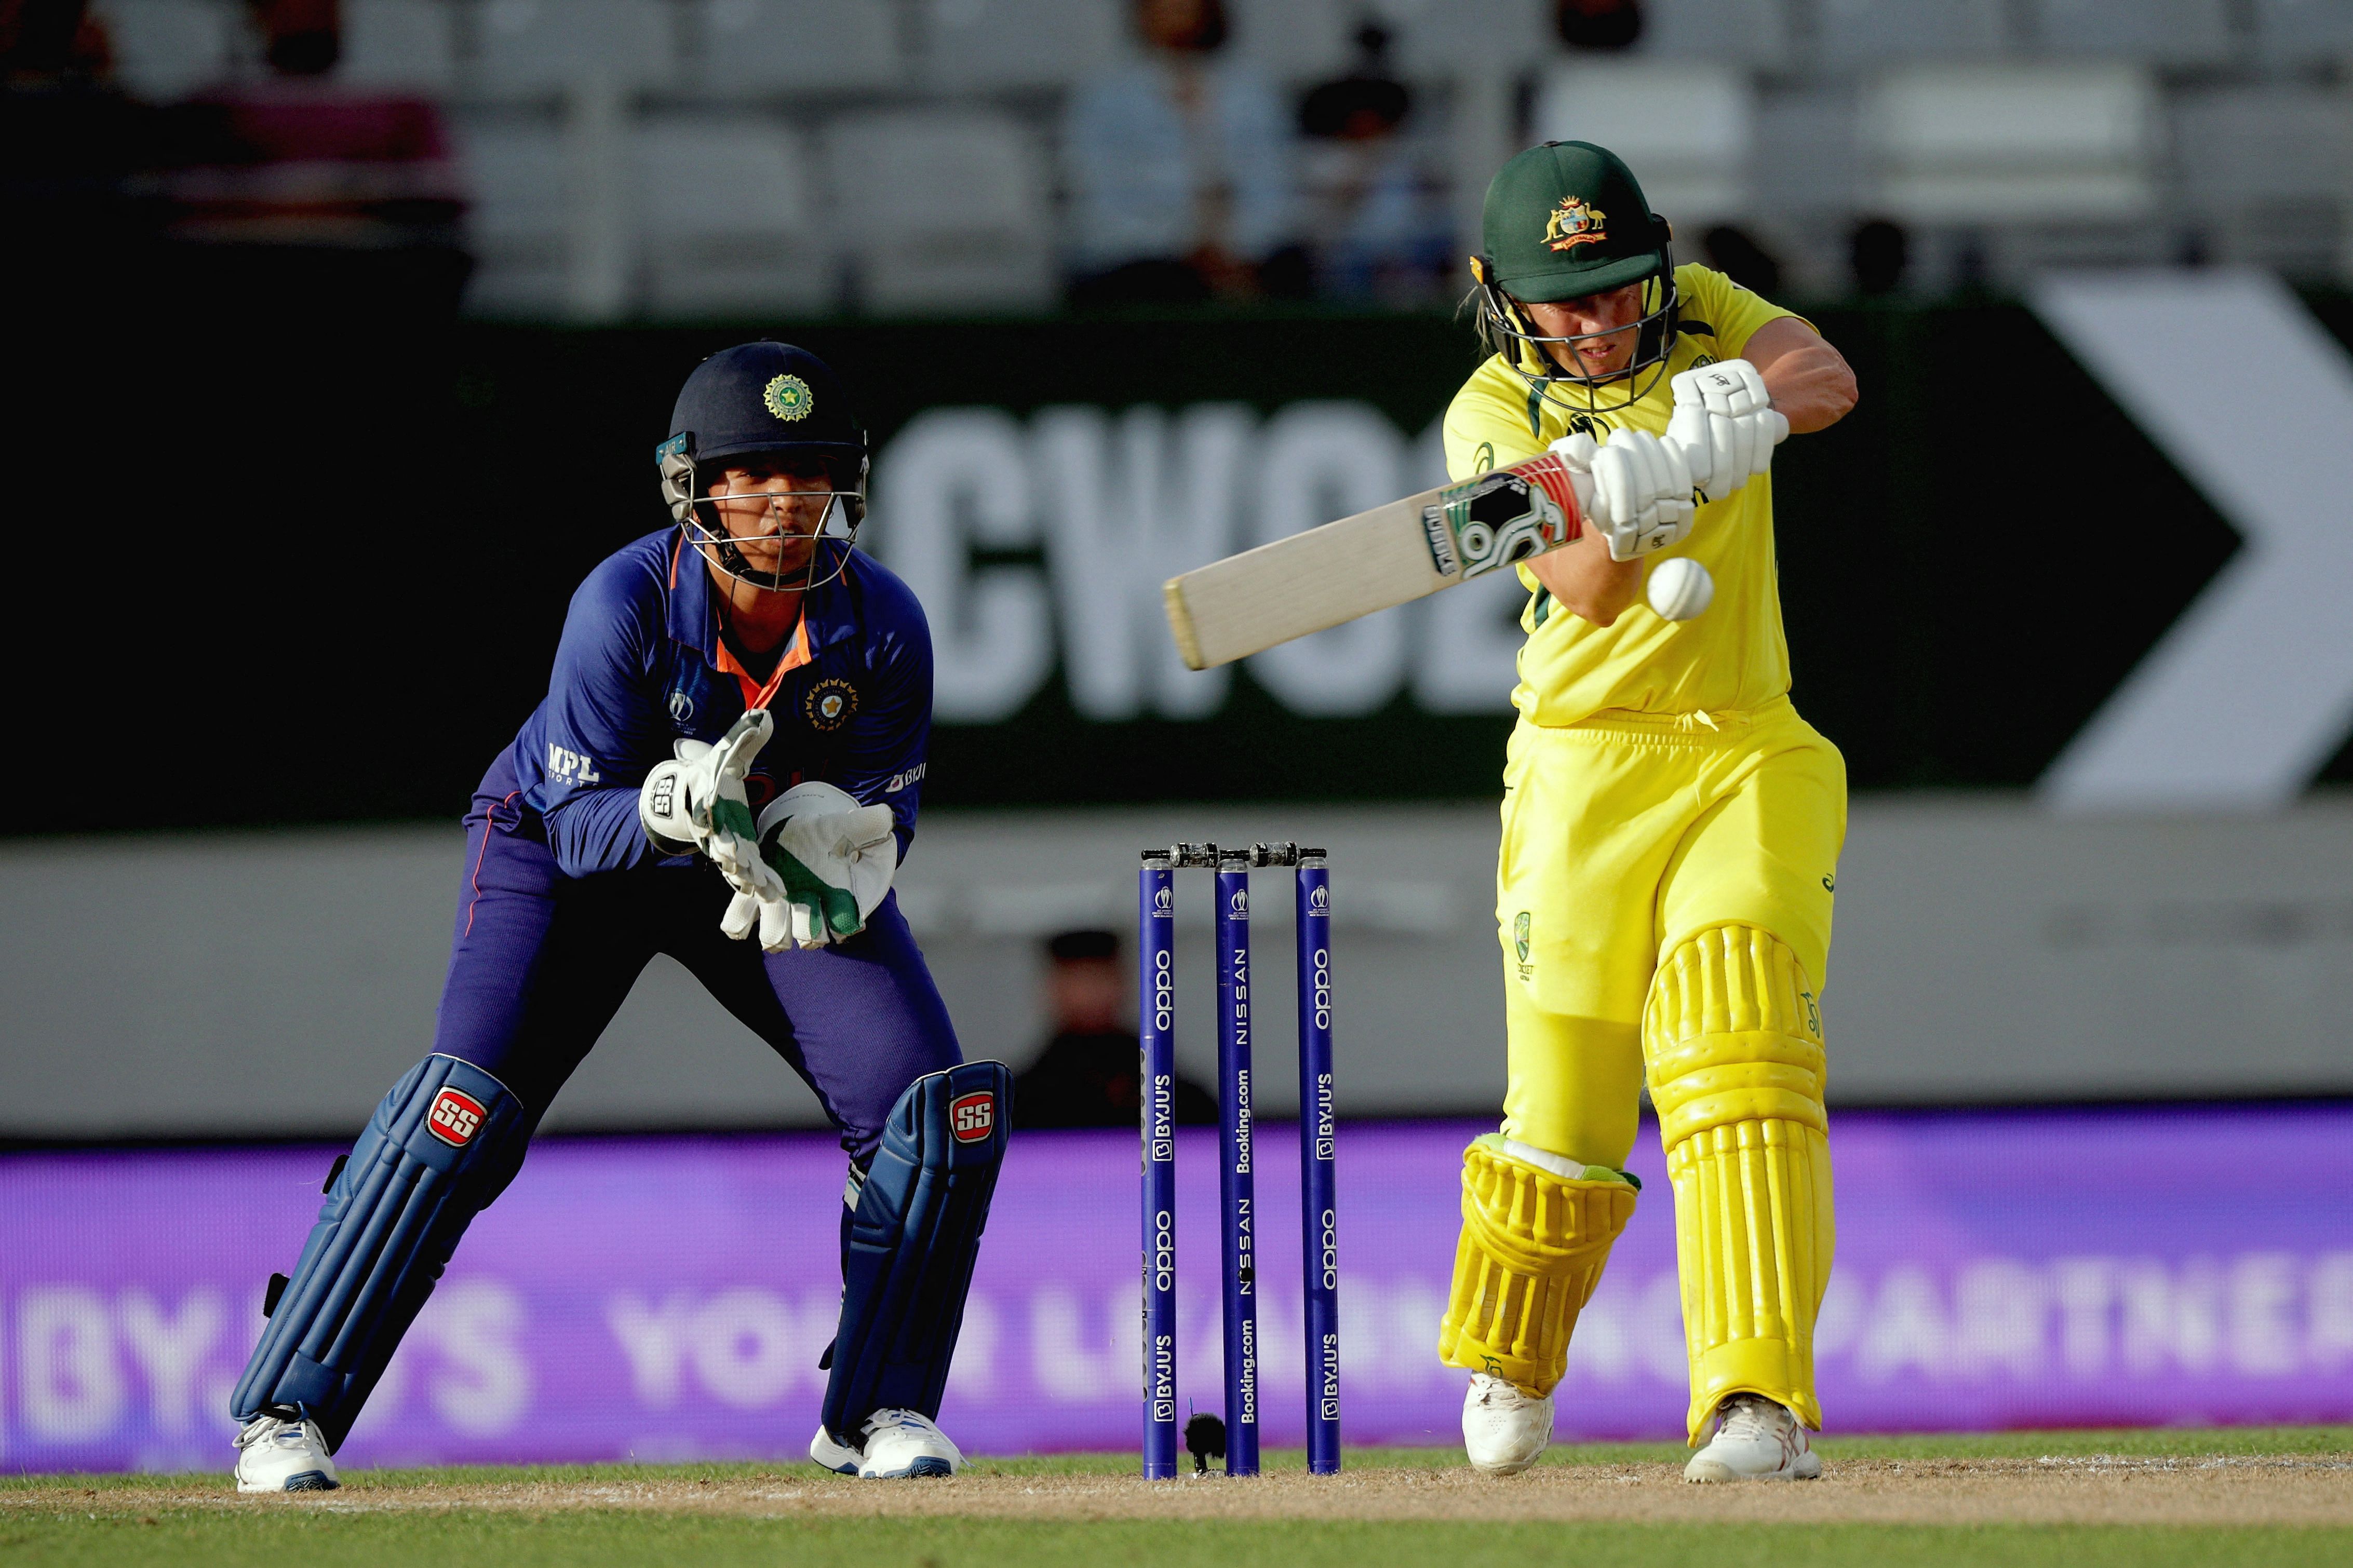 Australia’s Alyssa Healy plays a shot as India’s wicketkeeper Richa Ghosh (L) looks on during the 2022 Women's Cricket World Cup match between Australia and India at Eden Park in Auckland. Credit: AFP Photo